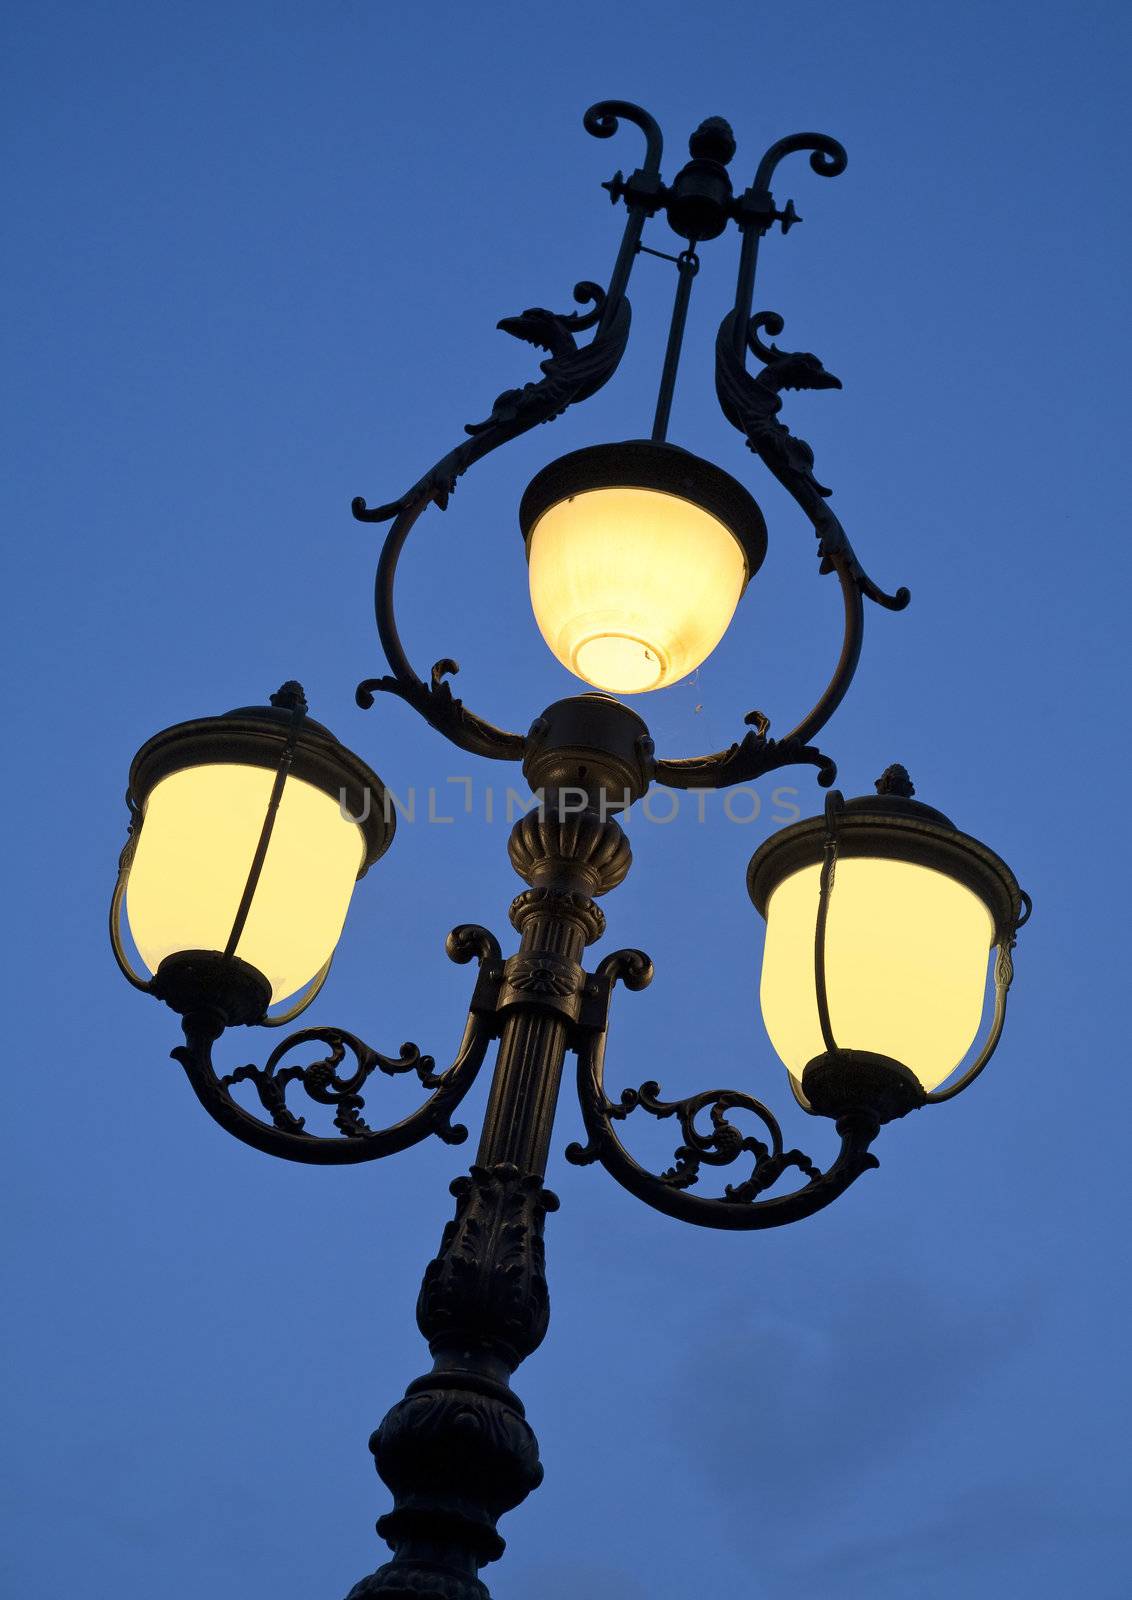 Nice old lamp at dusk. Seen in Lorezo - region of Marche, Italy.